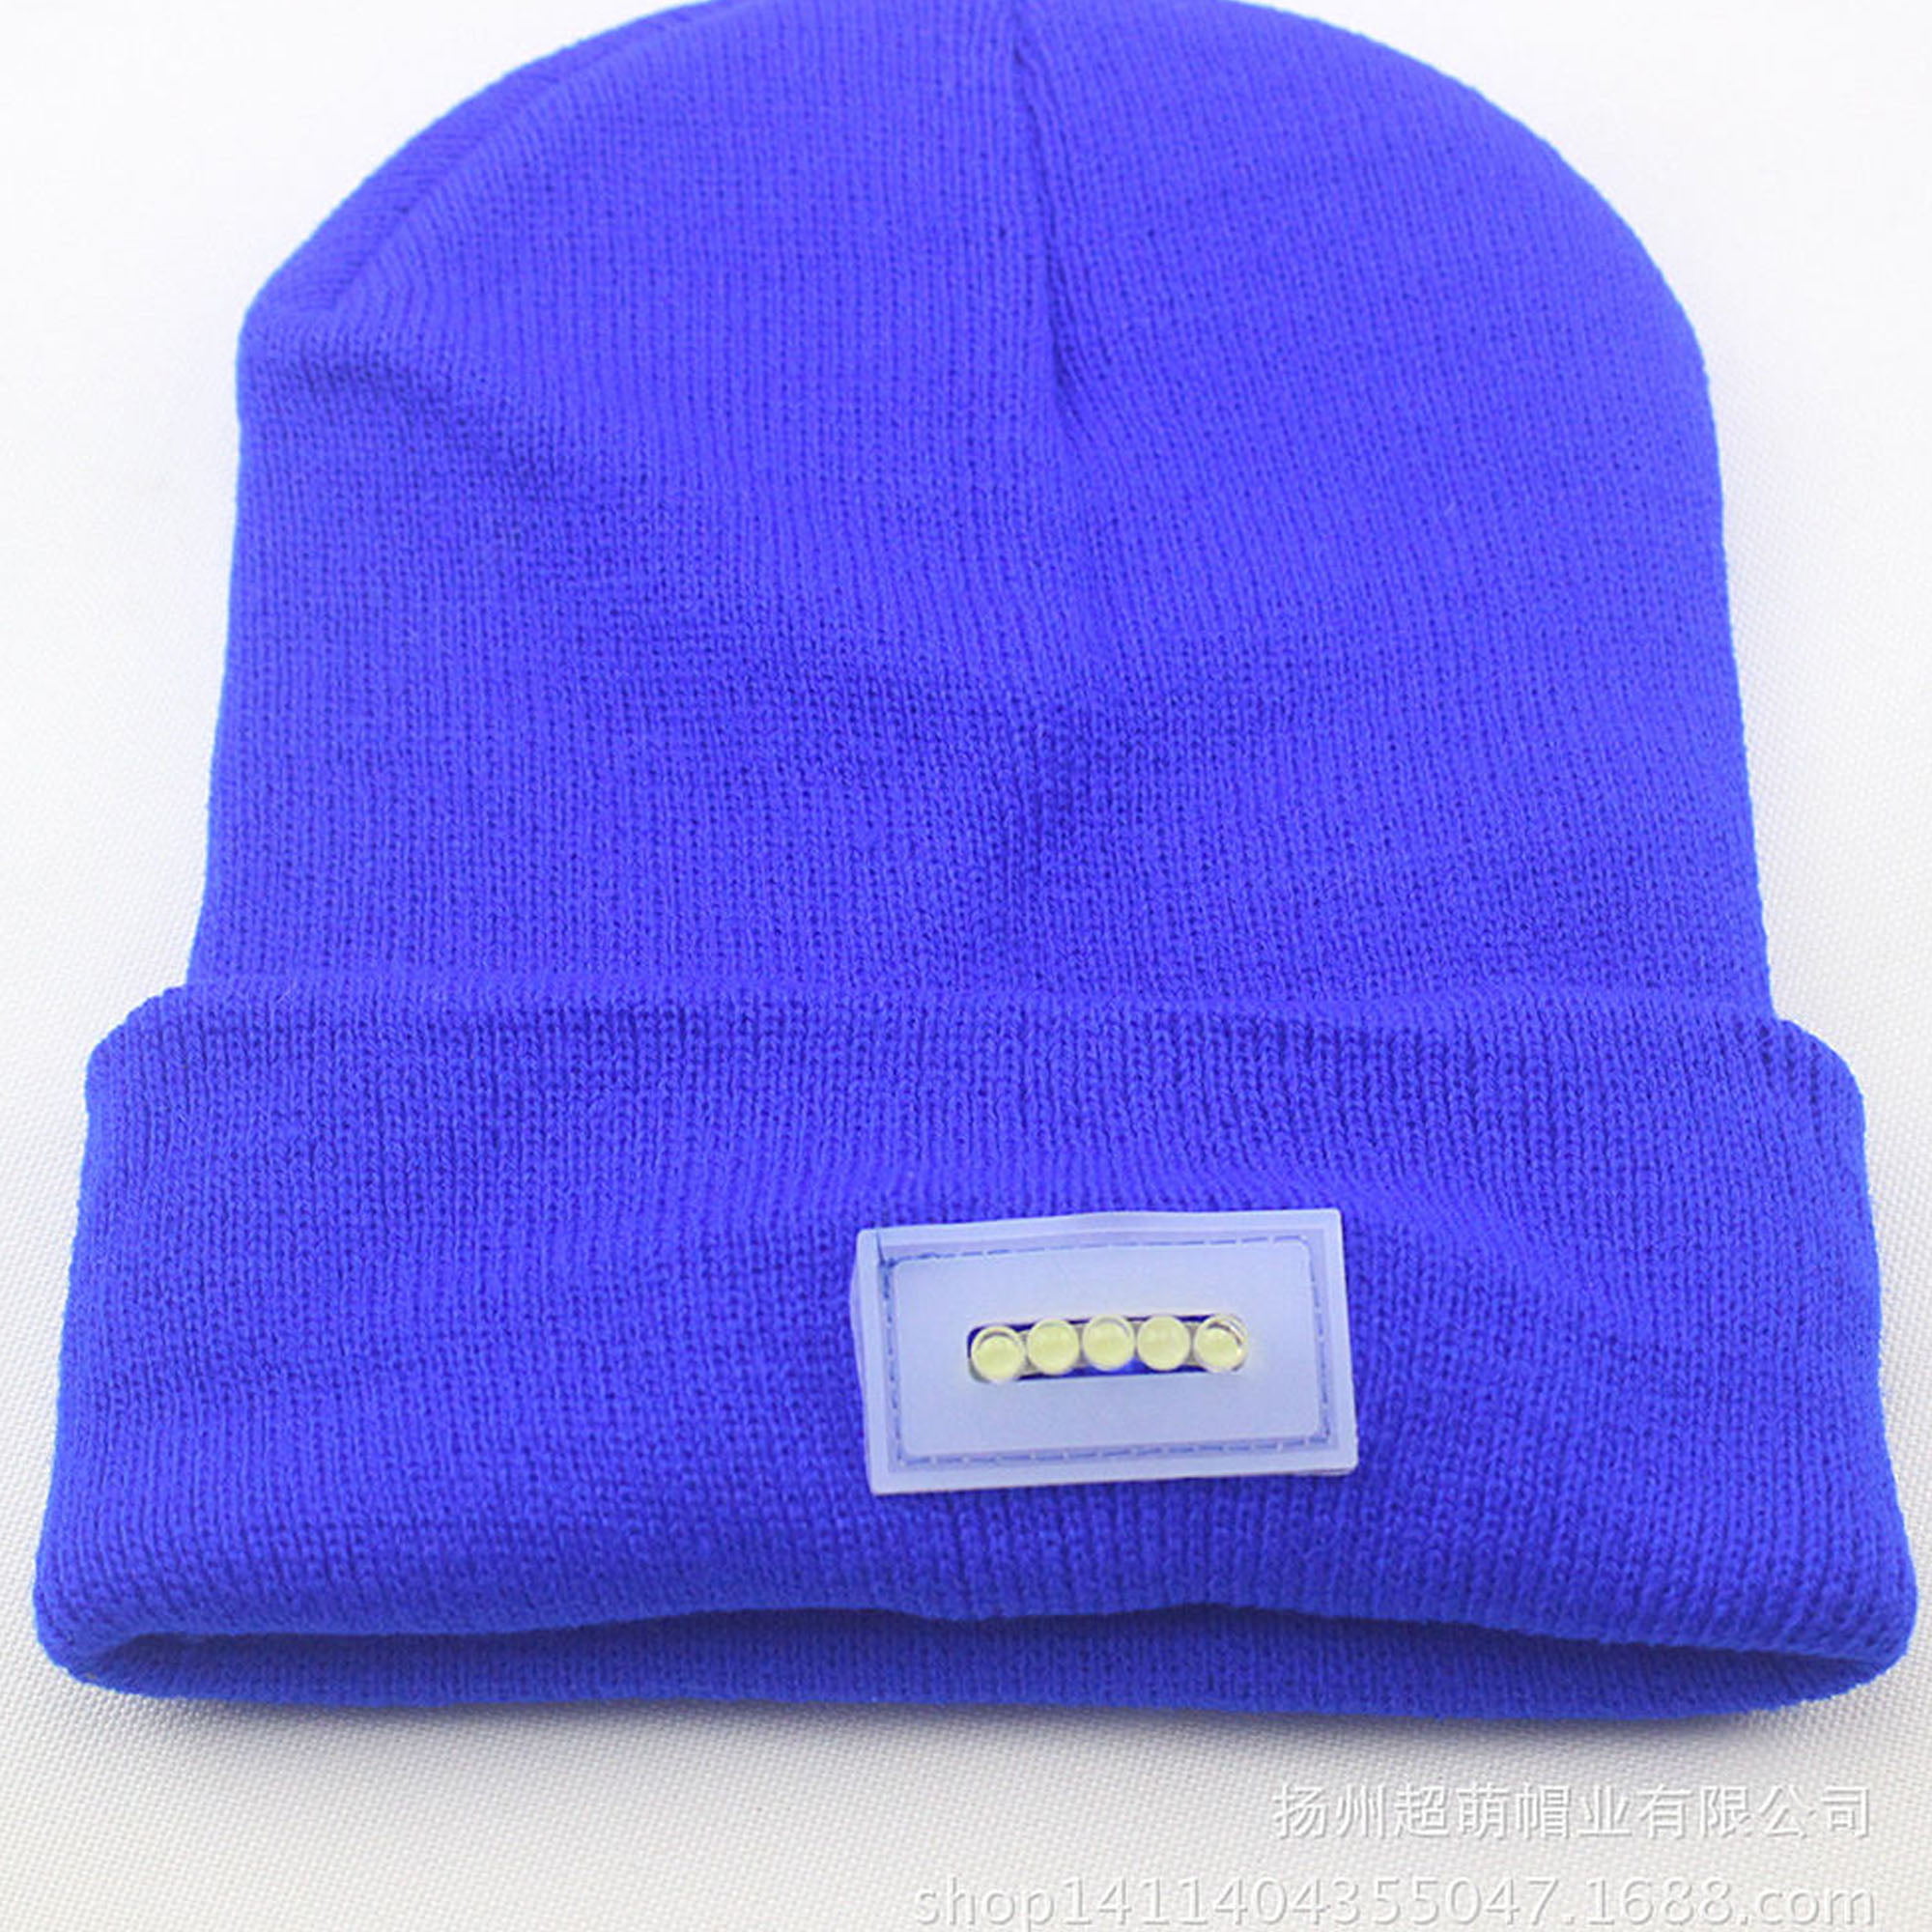 LED Beanie Hat With USB Rechargeable Battery Unisex High Powered Head Lamp Ku